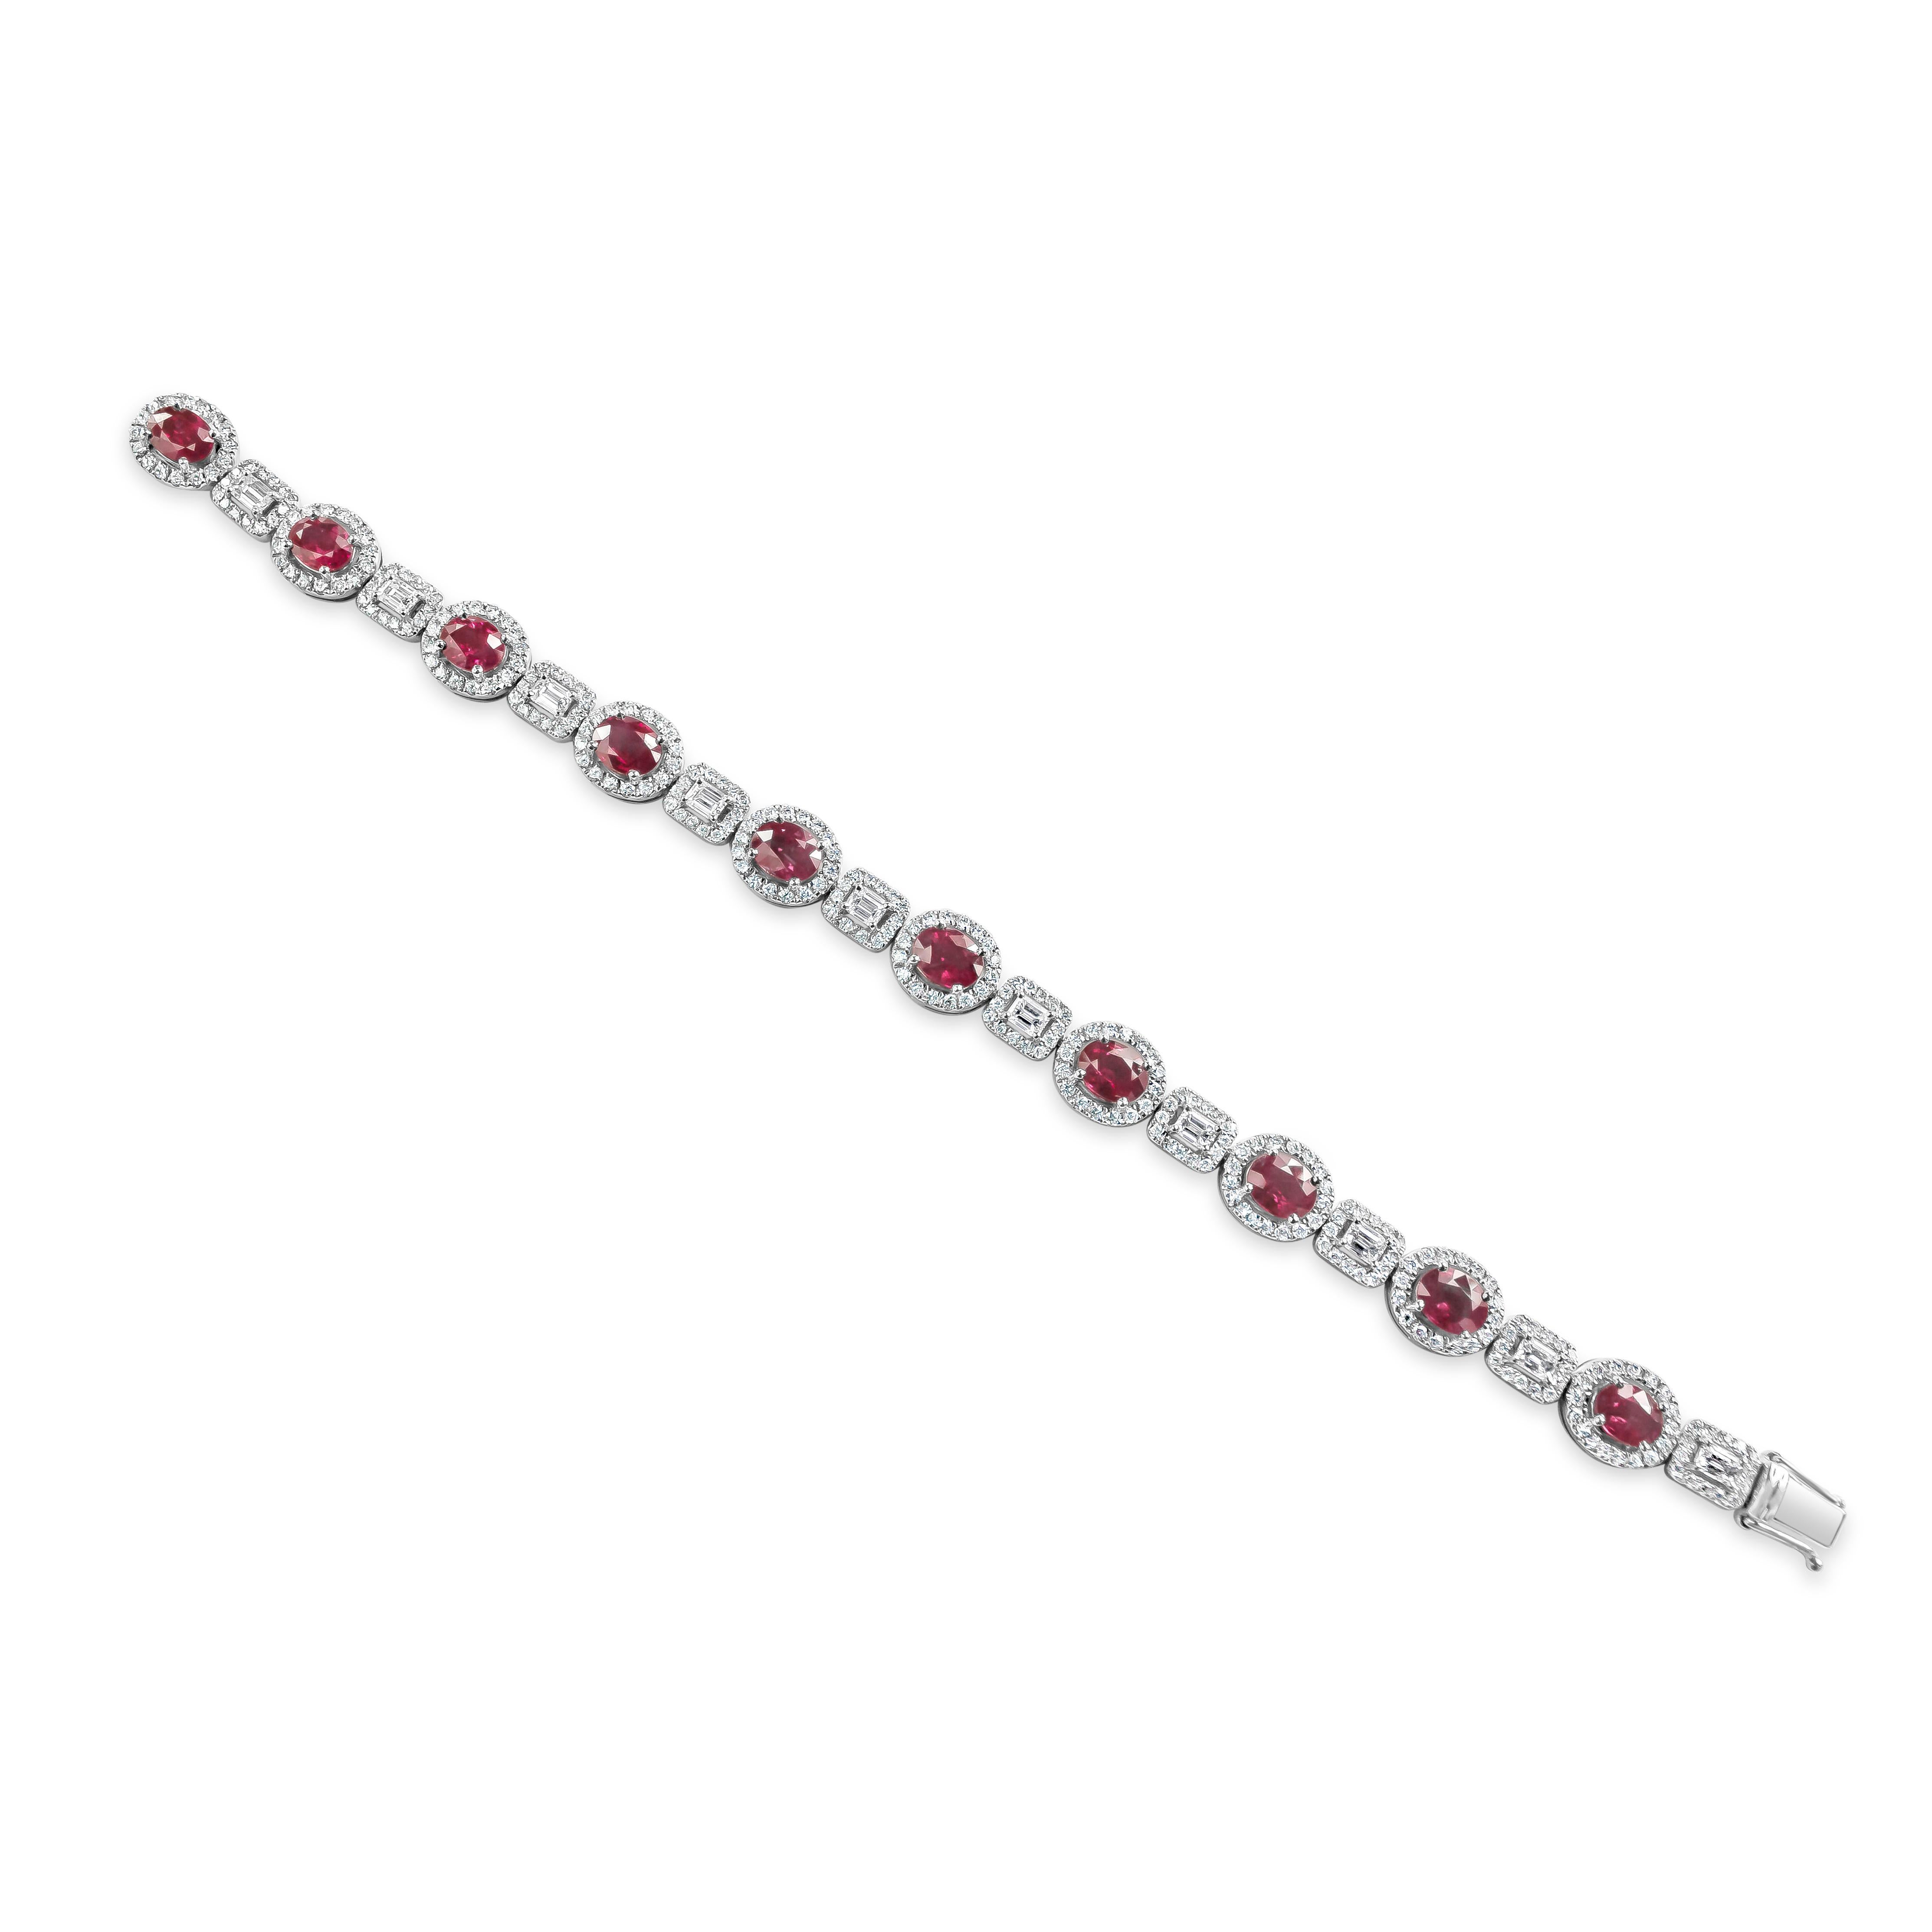 An exquisite elegant bracelet showcasing a color-rich oval cut rubies weighing 7 carats total. Evenly spaced by emerald cut diamonds weighing 1.36 carats. Surrounding the rubies and emerald diamonds are round melee diamonds in a halo design weighing